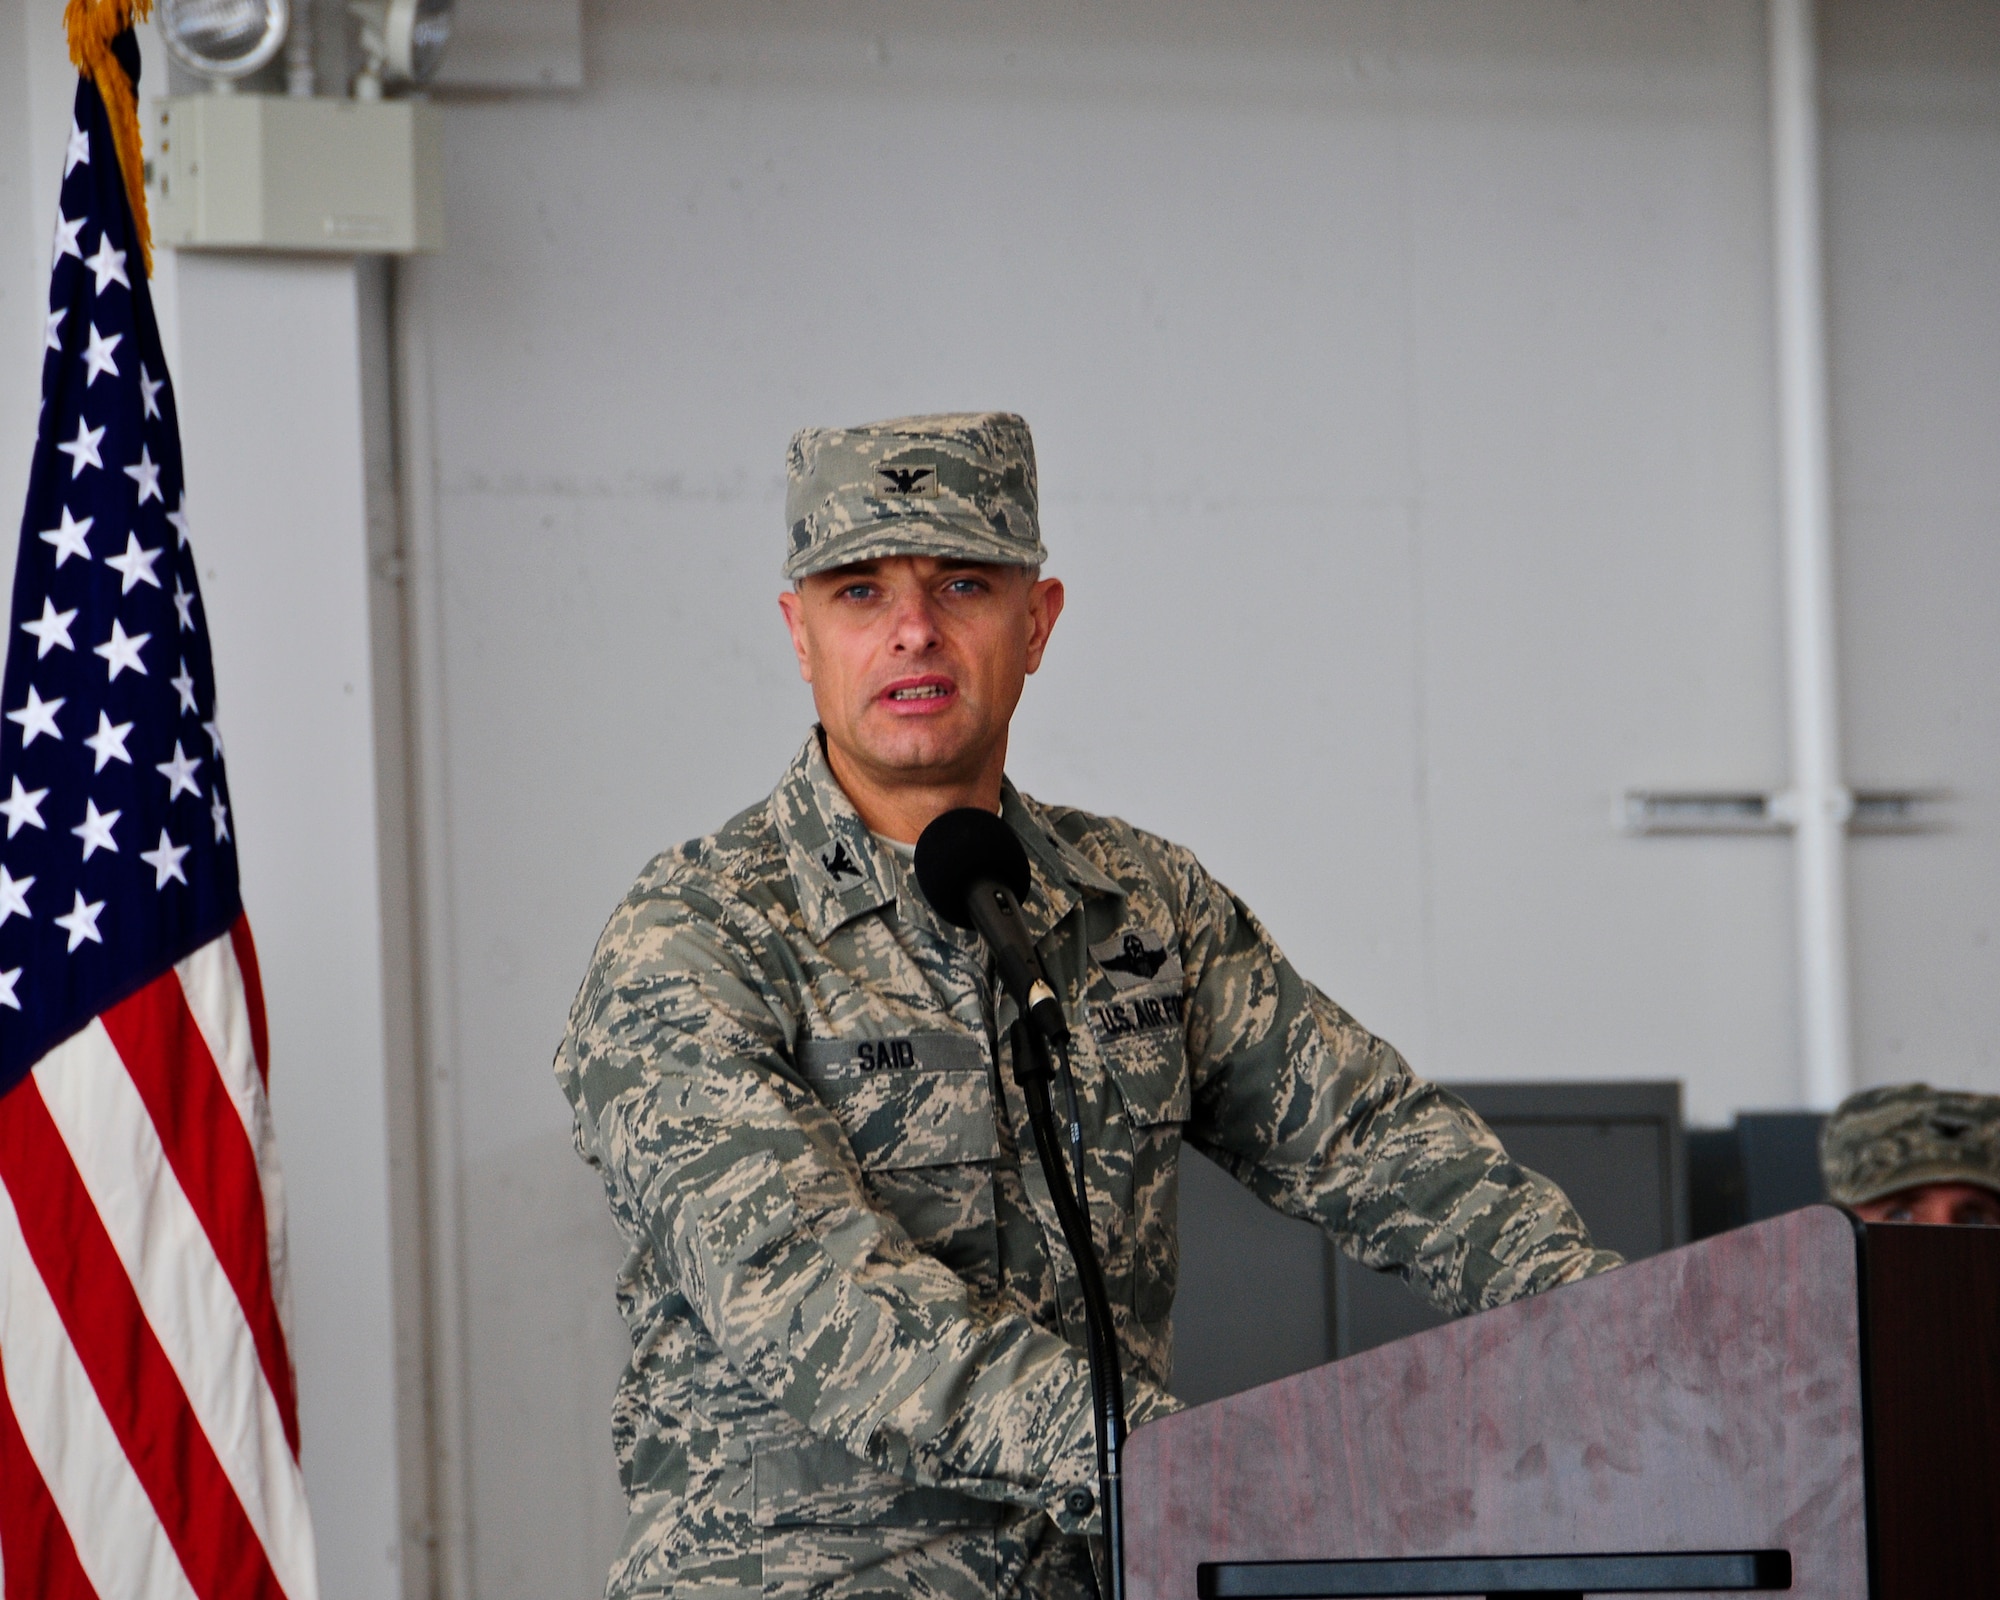 Col. Sami Said, 144th Fighter Wing Commander, adresses the Airmen of the 144th Maintenance Group during a change of command ceremony August 7, 2011. Col. Mark Favetti assumed command of the 144th Maintenance group during the ceremony.